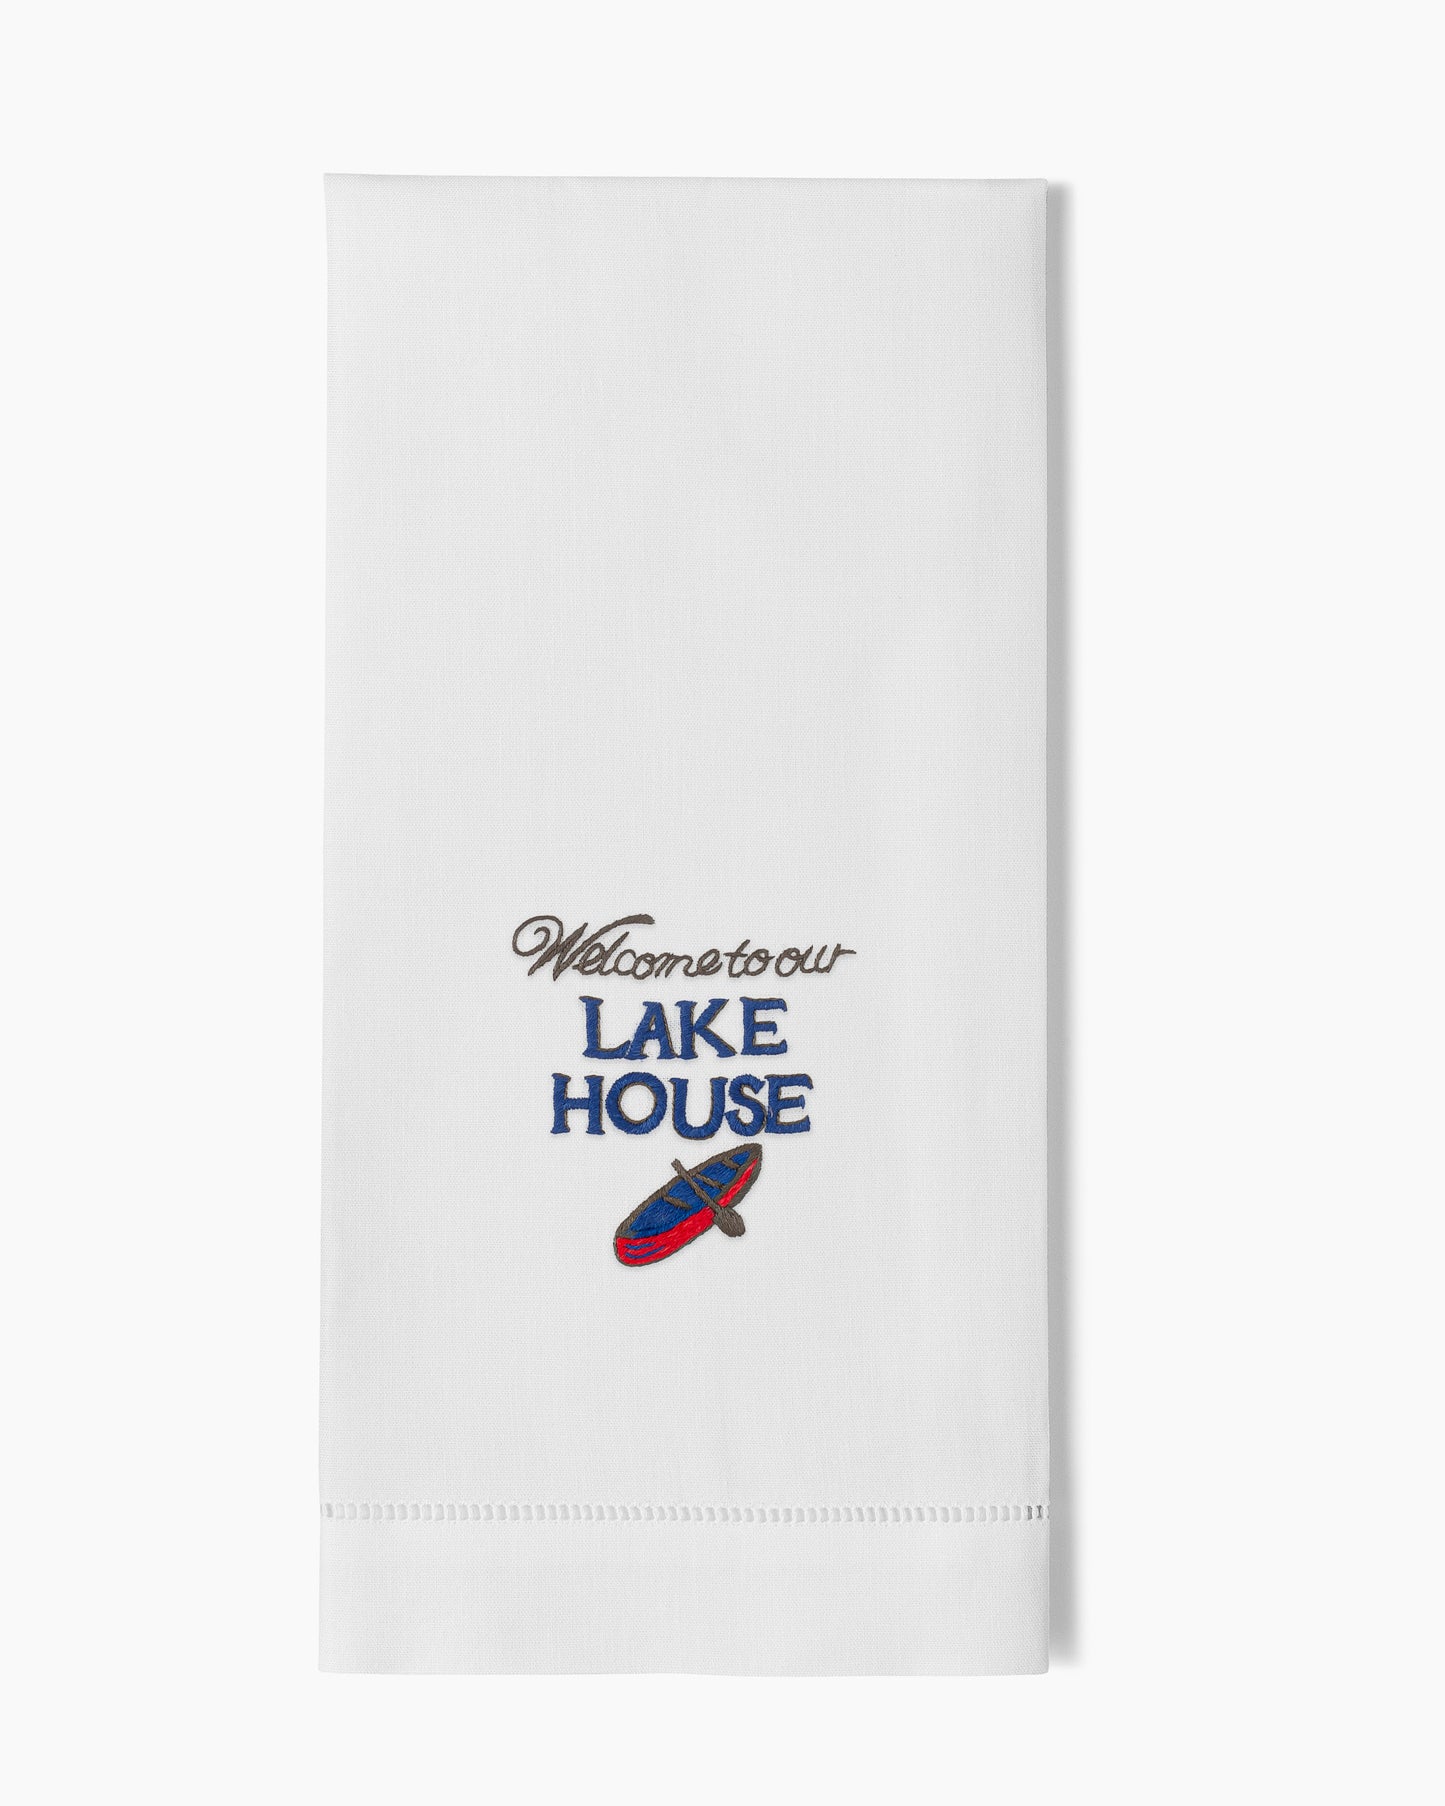 A white Henry Handwork towel that says Welcome to our Lake House.